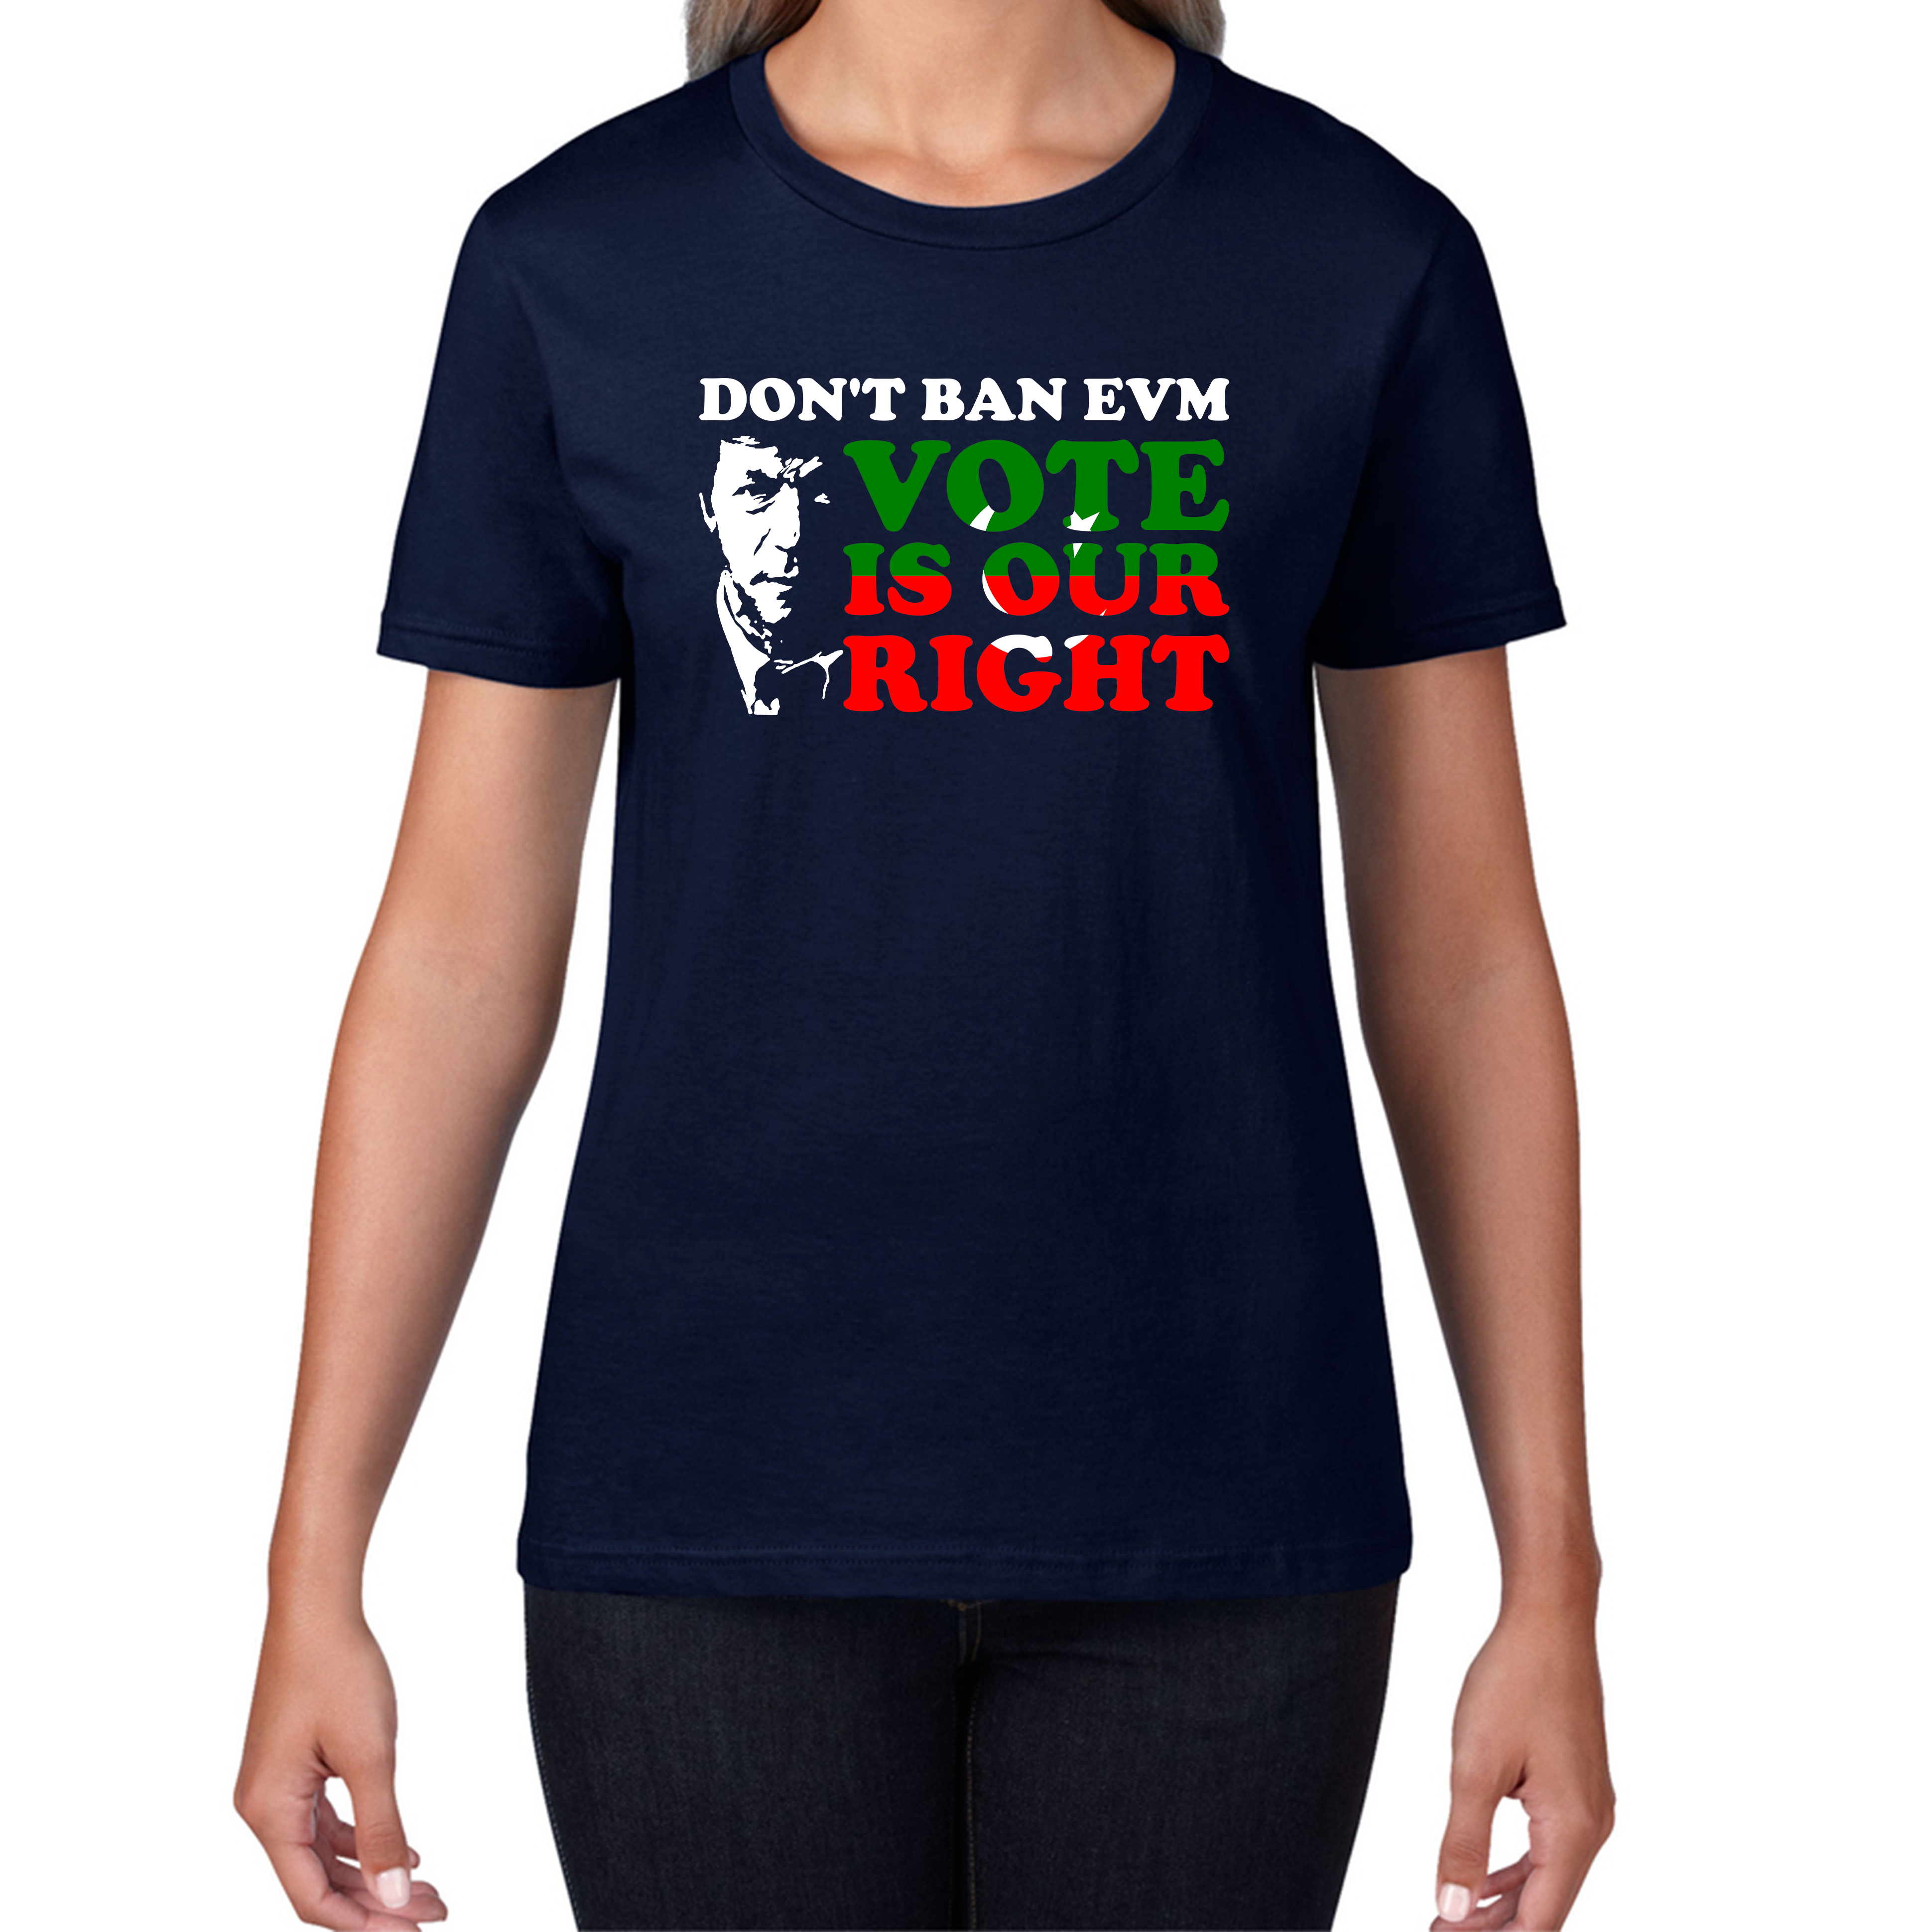 Don't Ban EVM Vote Is Our Right Imran Khan PTI Pakistani Politician Womens Tee Top